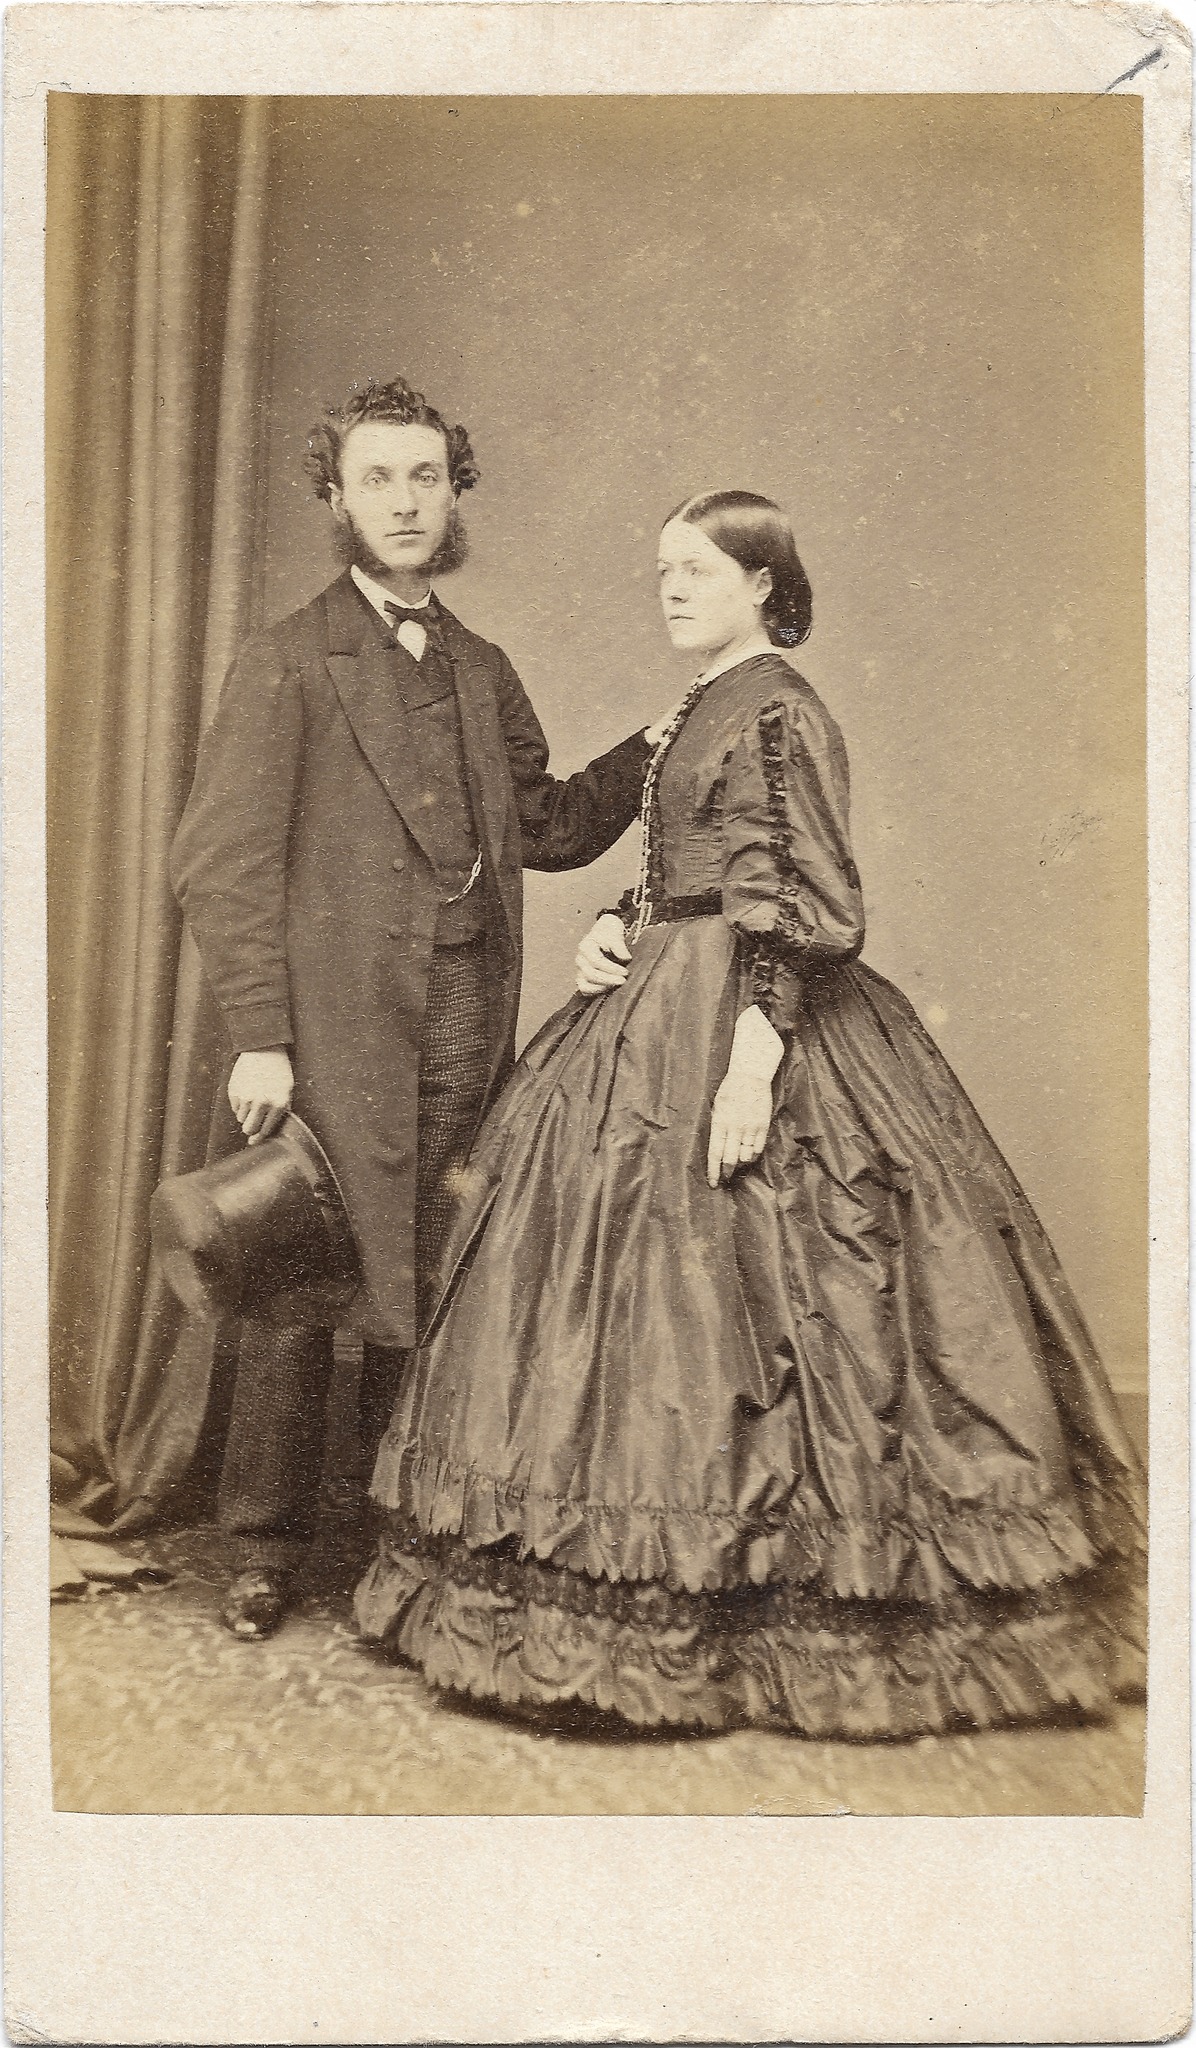 Pryce Jones and his wife Eleanor standing togeether